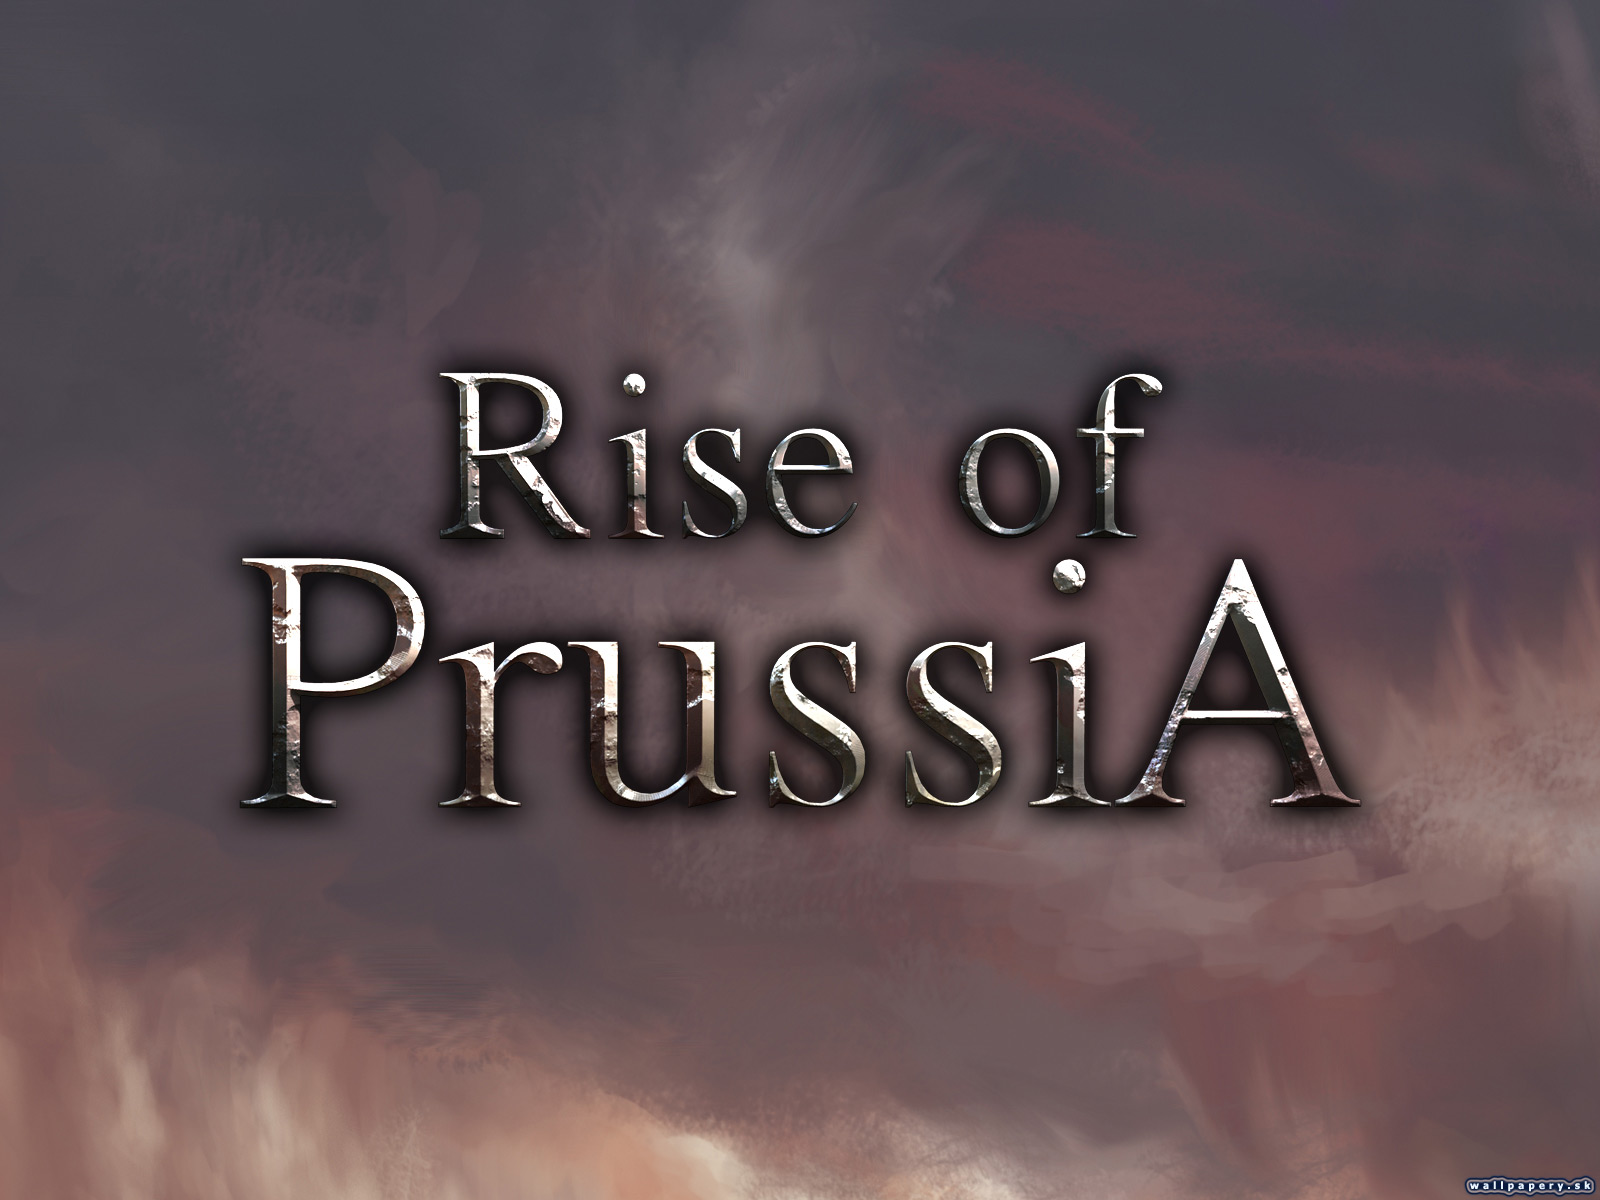 Rise of Prussia - wallpaper 3